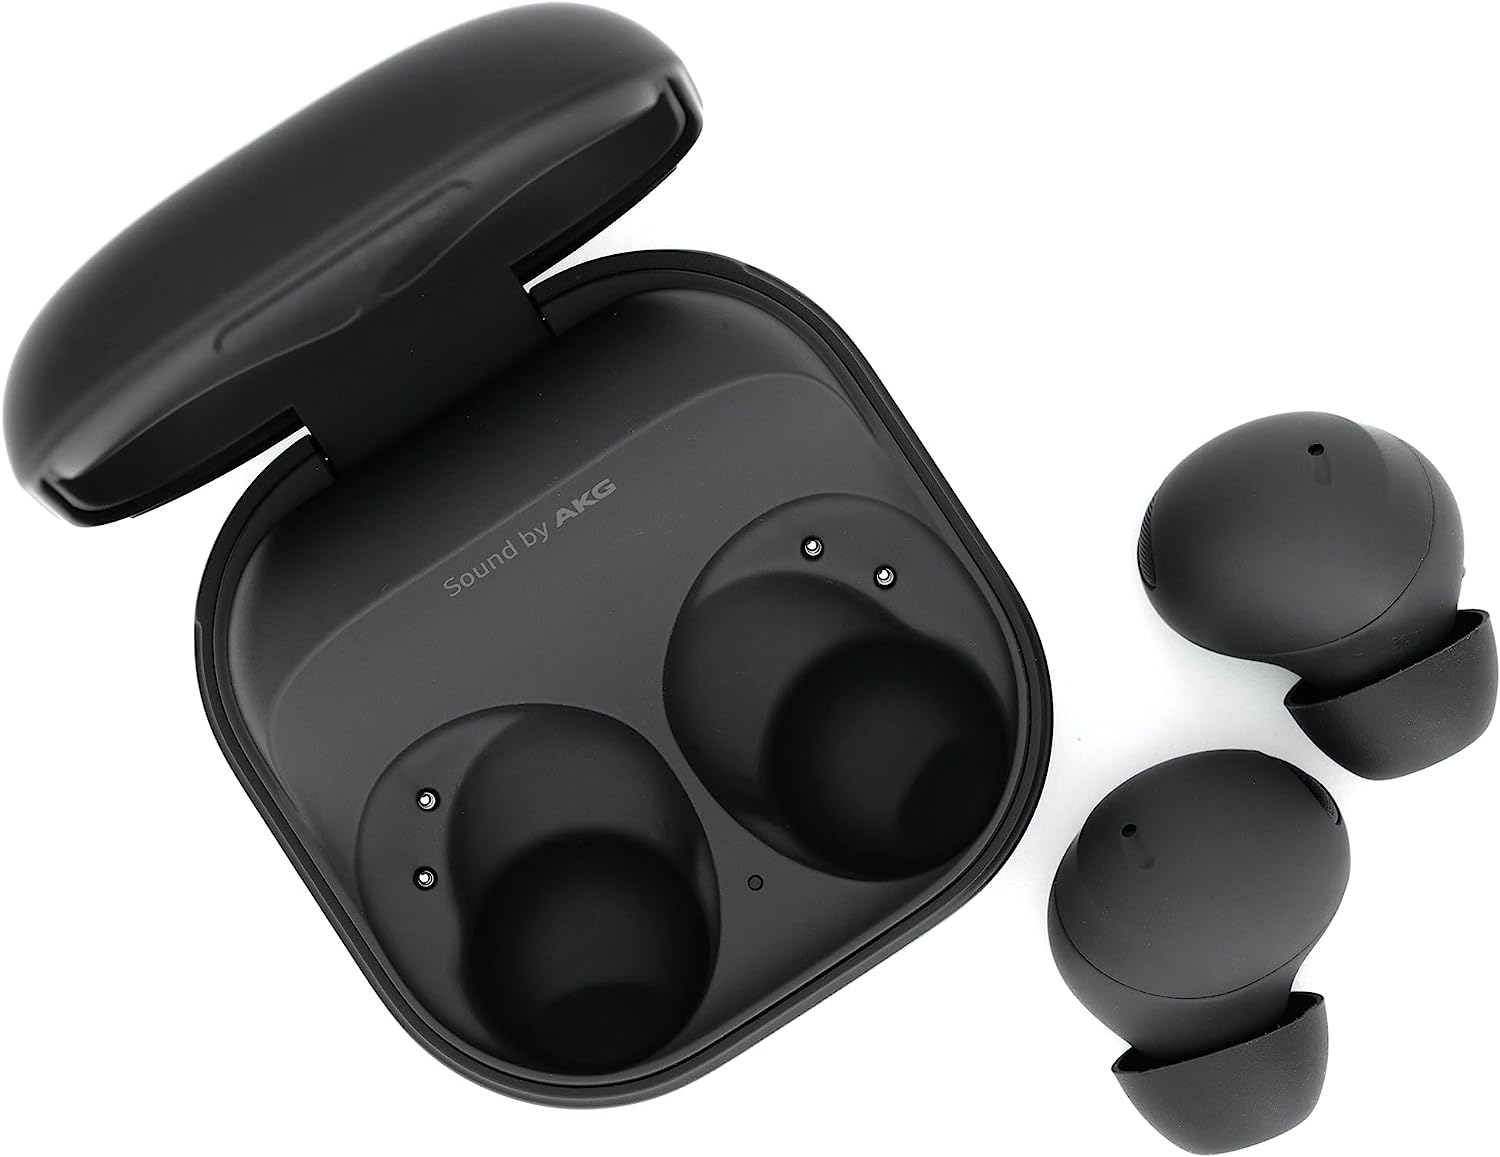 Samsung Galaxy Buds 2 Pro Price Crash: Get 50% Off in Early Amazon Prime Day Deal